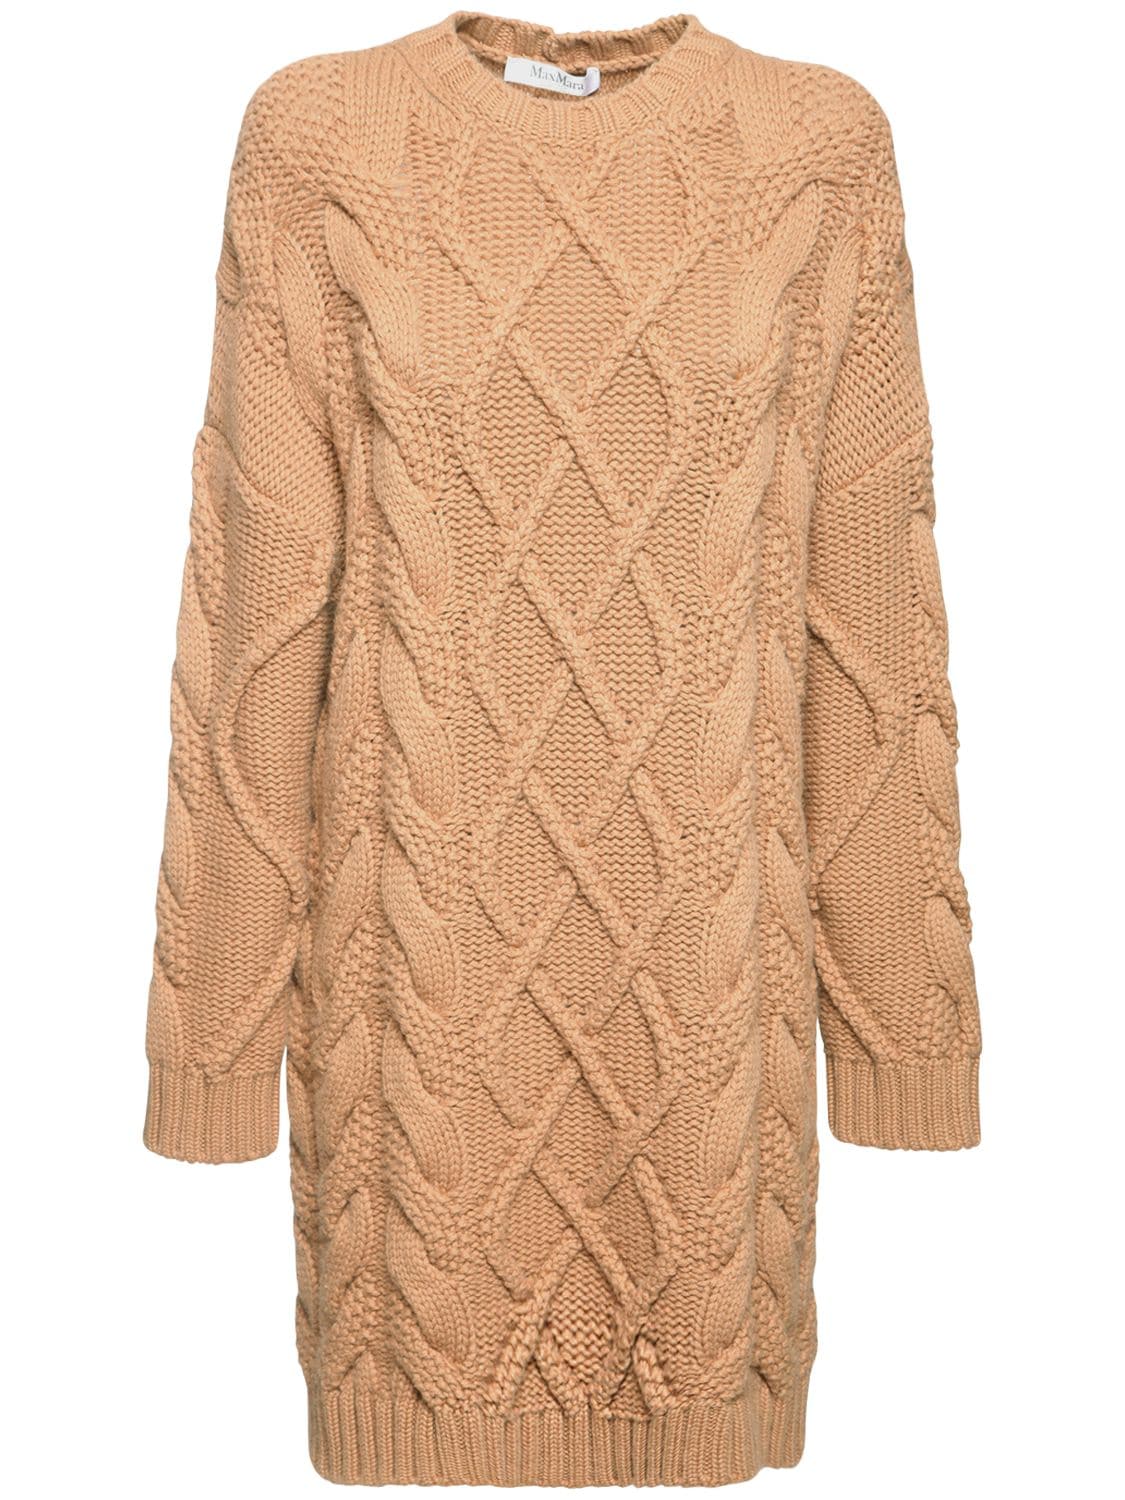 Max Mara Wool & Cashmere Cable Knit Maxi Dress In Camel